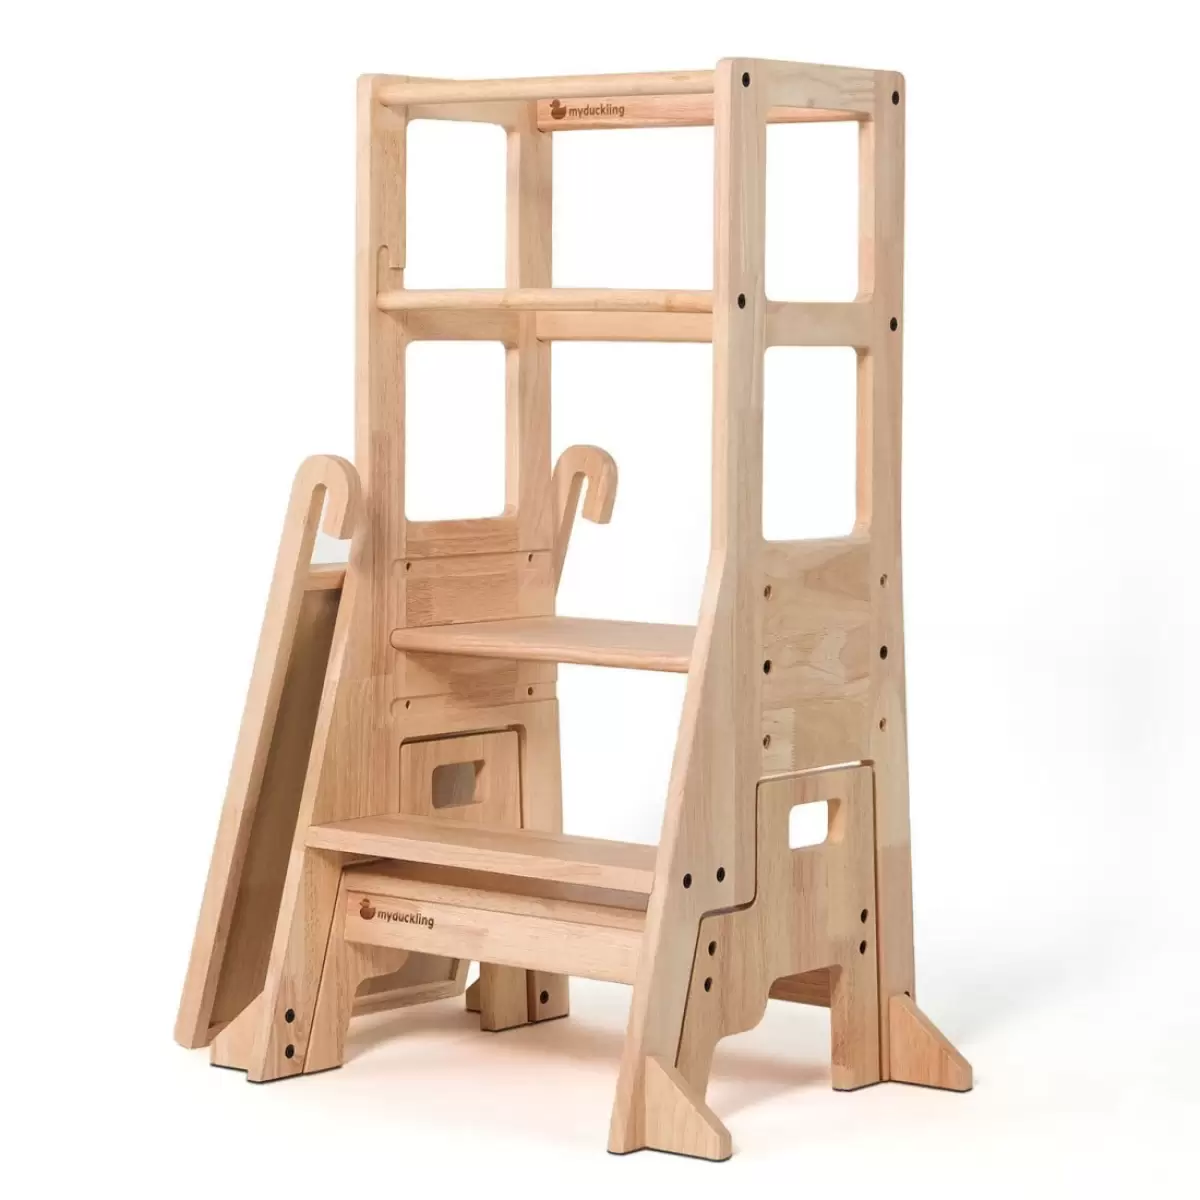 My Duckling Deluxe Solid Wood Adjustable Learning Tower 2